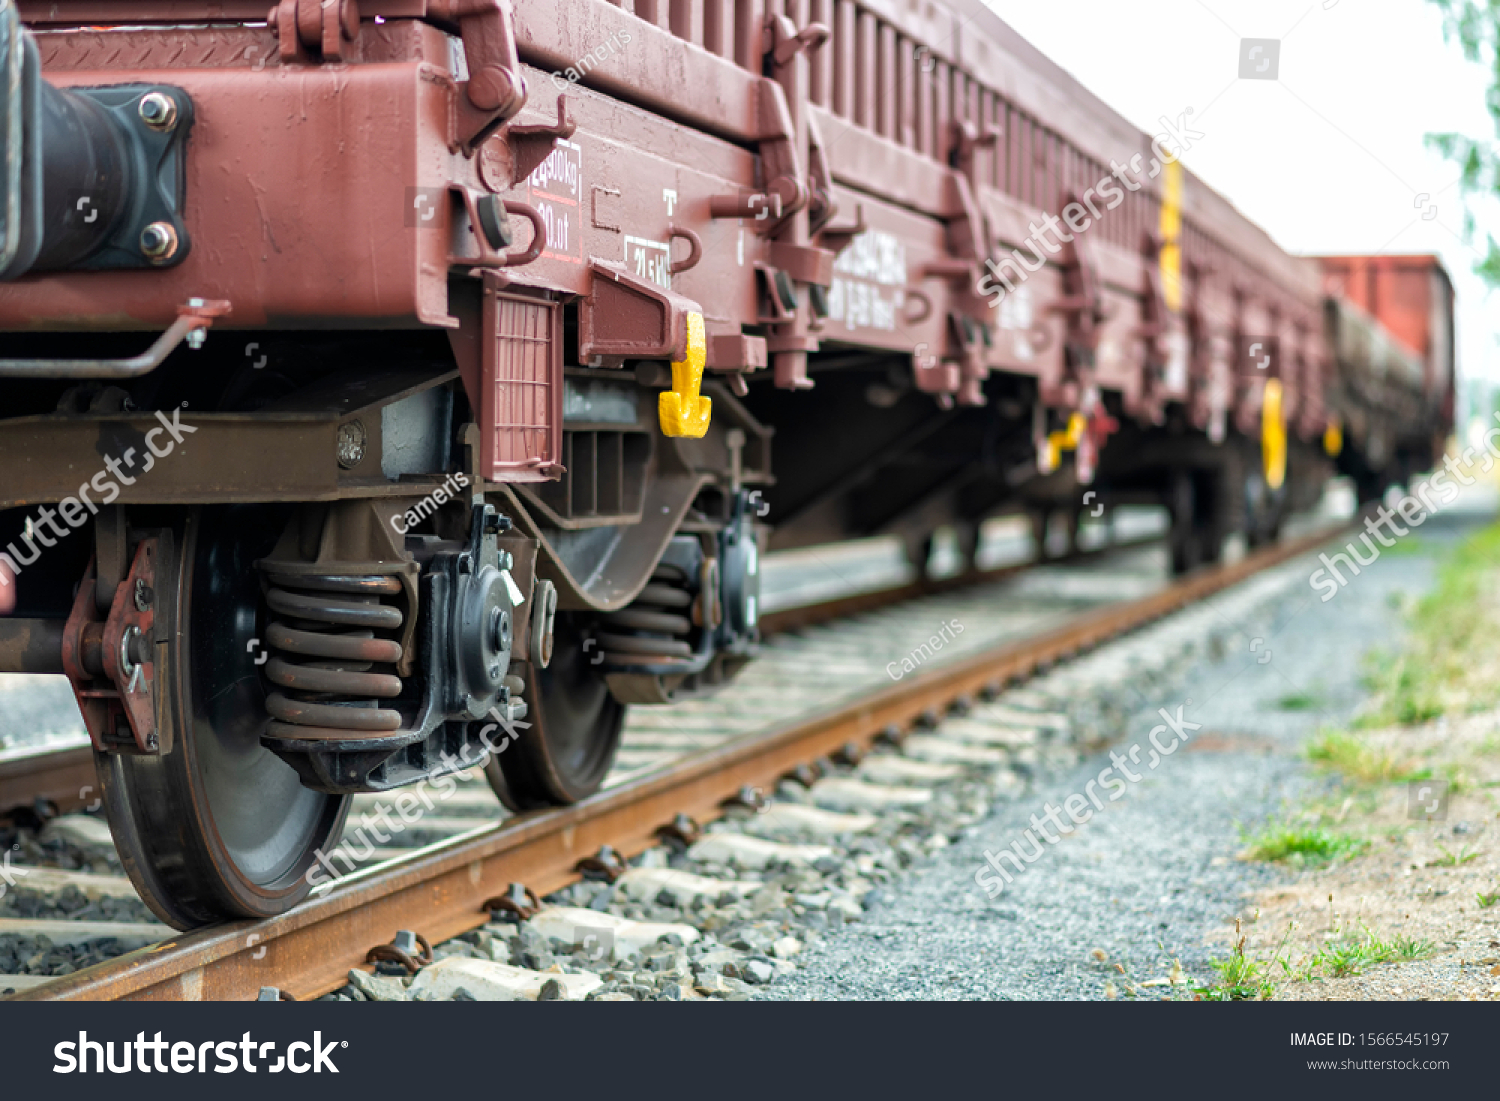 freight train with freight wagons at a shunt yard in Europe #1566545197